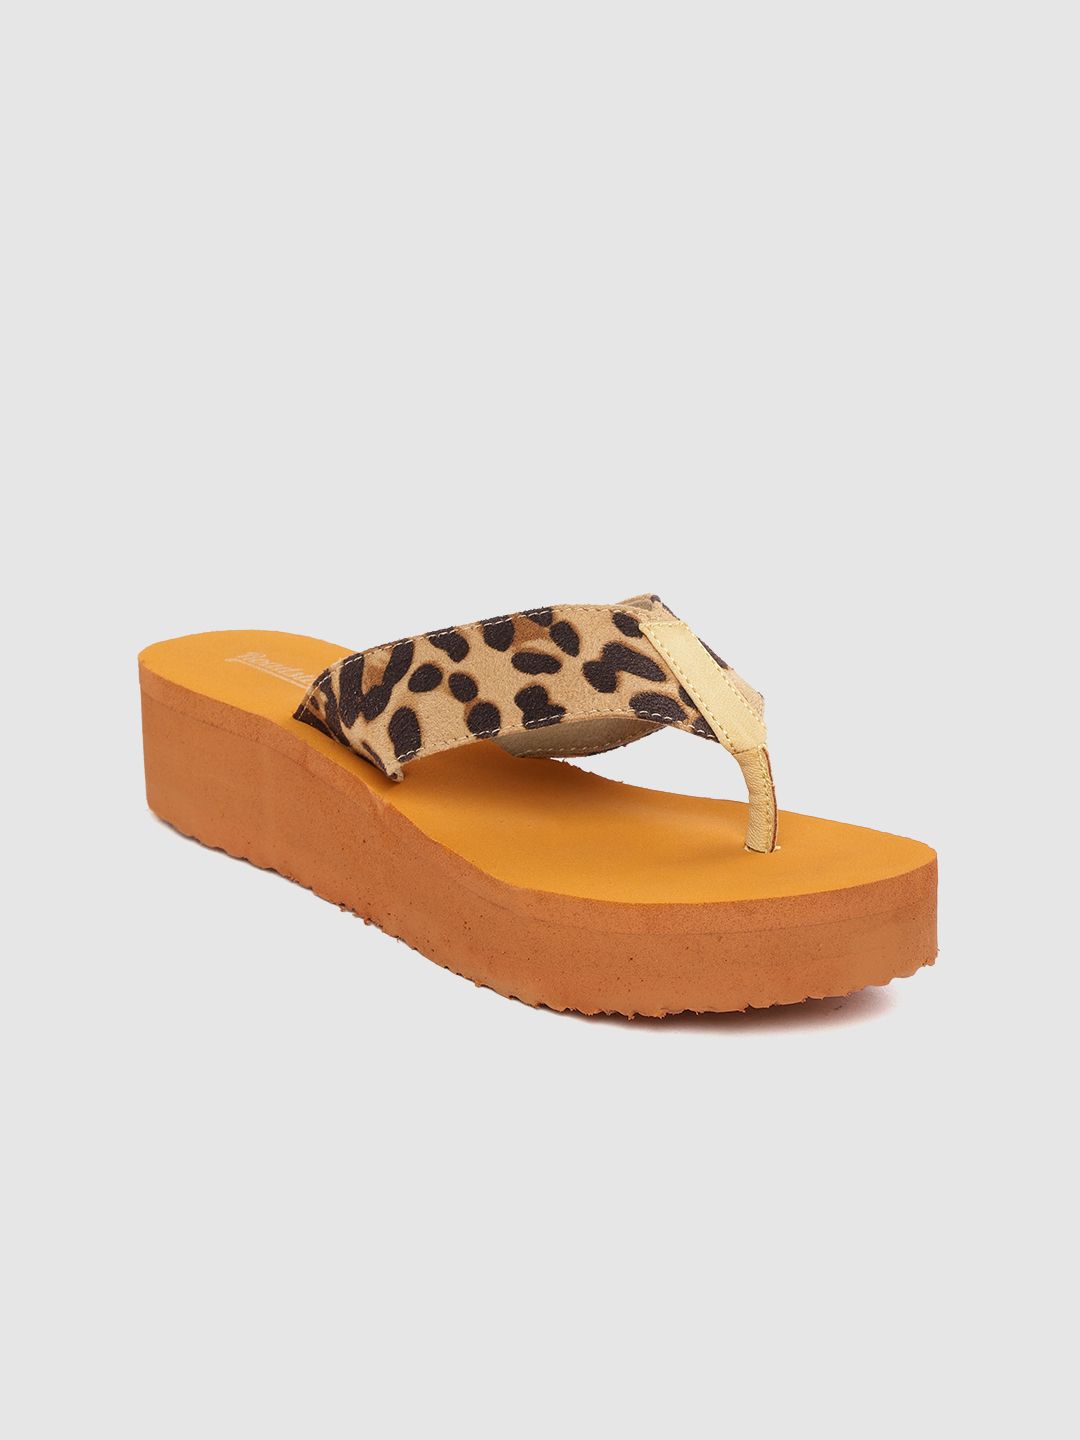 The Roadster Lifestyle Co Beige & Brown Leopard Print Flip-Flops Price in India